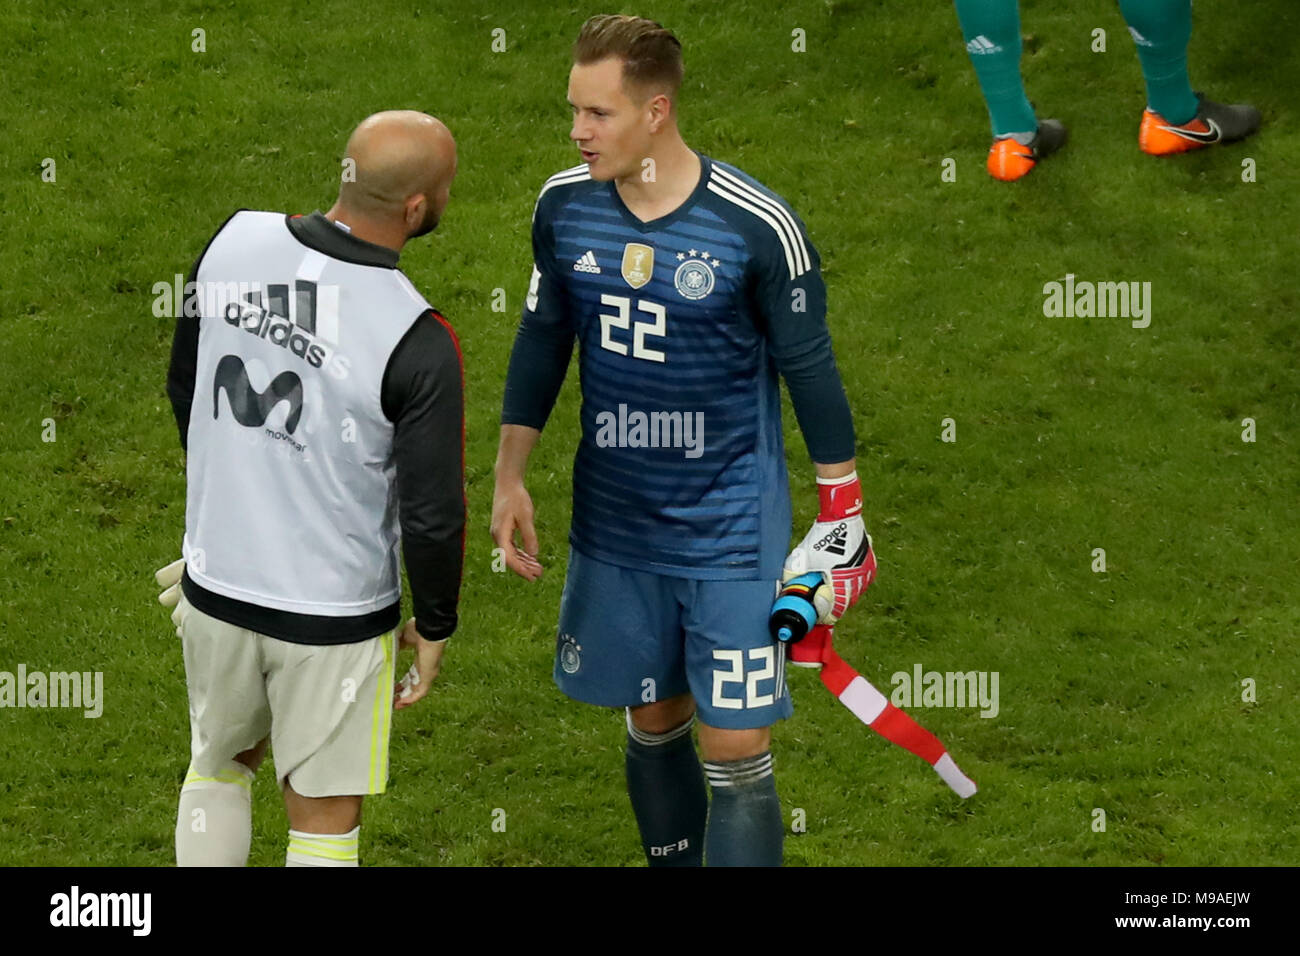 Soccer: Friendly match, Germany vs Spain, 23 March 2018 in the ESPRIT arena, Duesseldorf, Germany: Germany goalkeeper Marc-Andre ter Stegen (R) speaking with Spain's Pepe Reina after the game. Photo: Christian Charisius/dpa Stock Photo